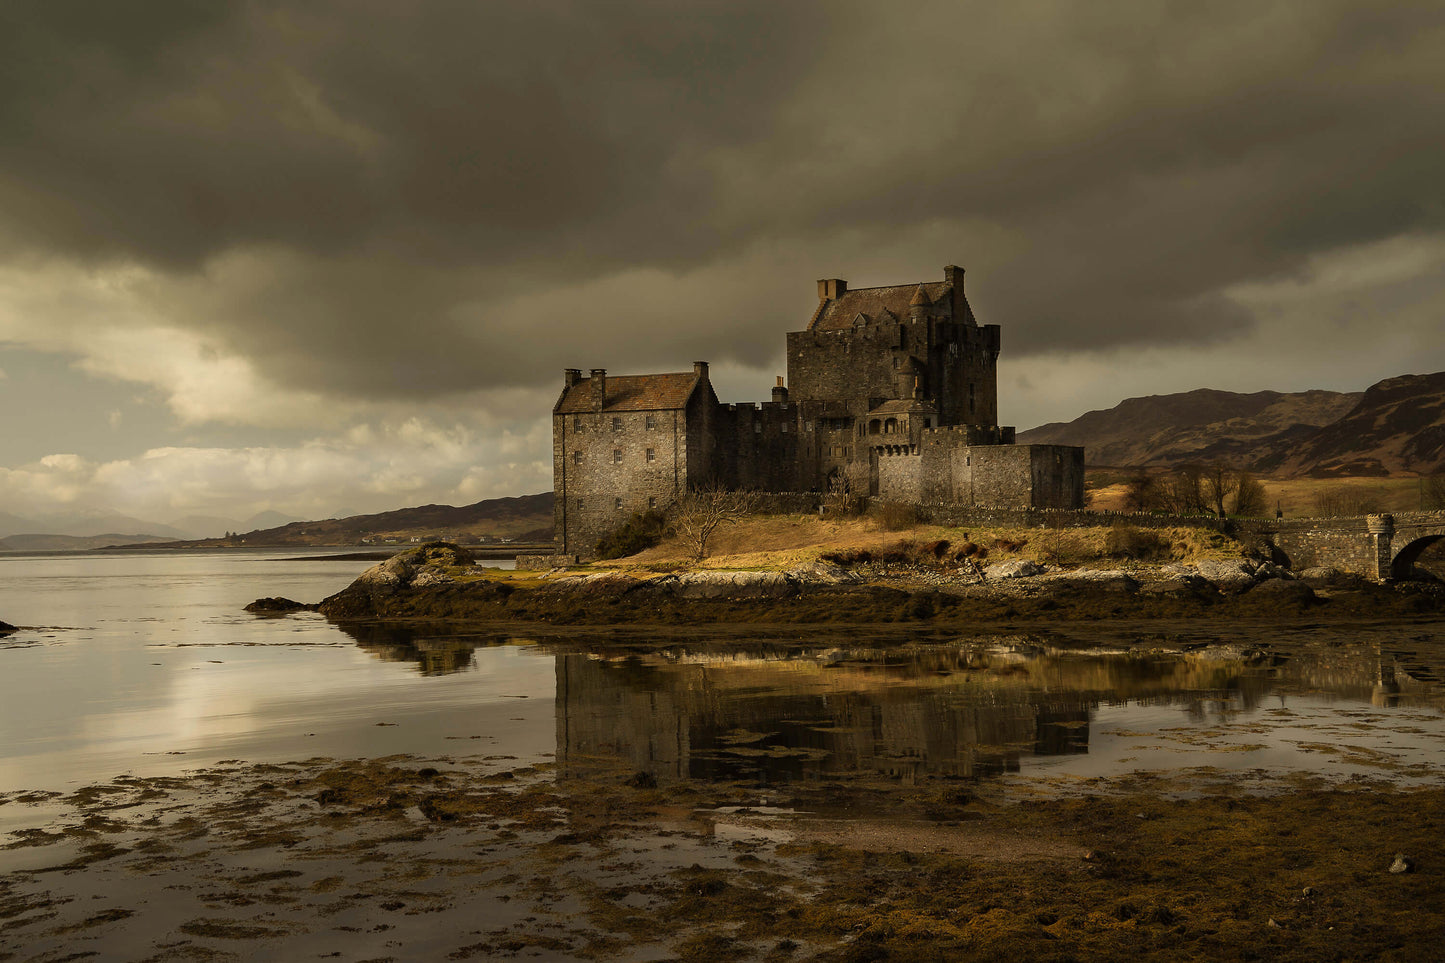 Dark clouds create an ominous view of this Scottish Castle in Scotland